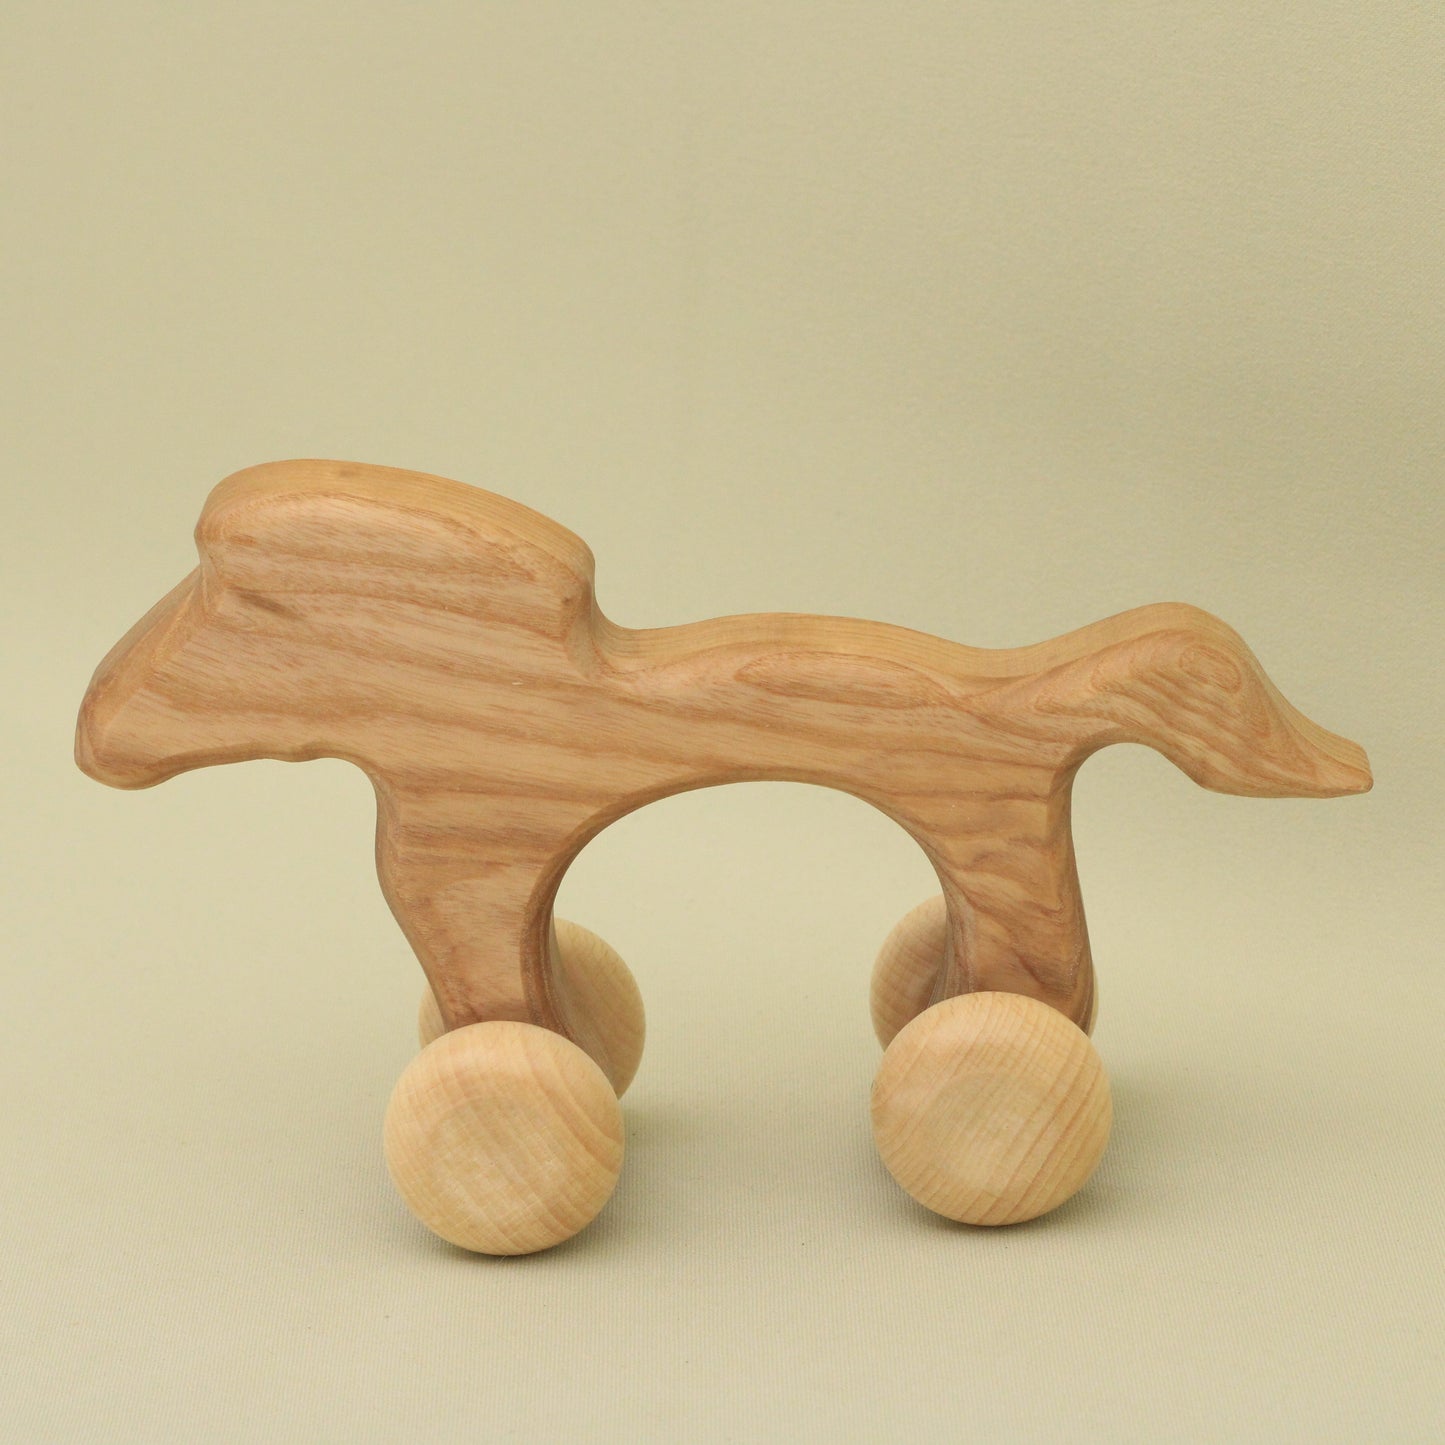 Lotes Toys Wooden Horse WA07